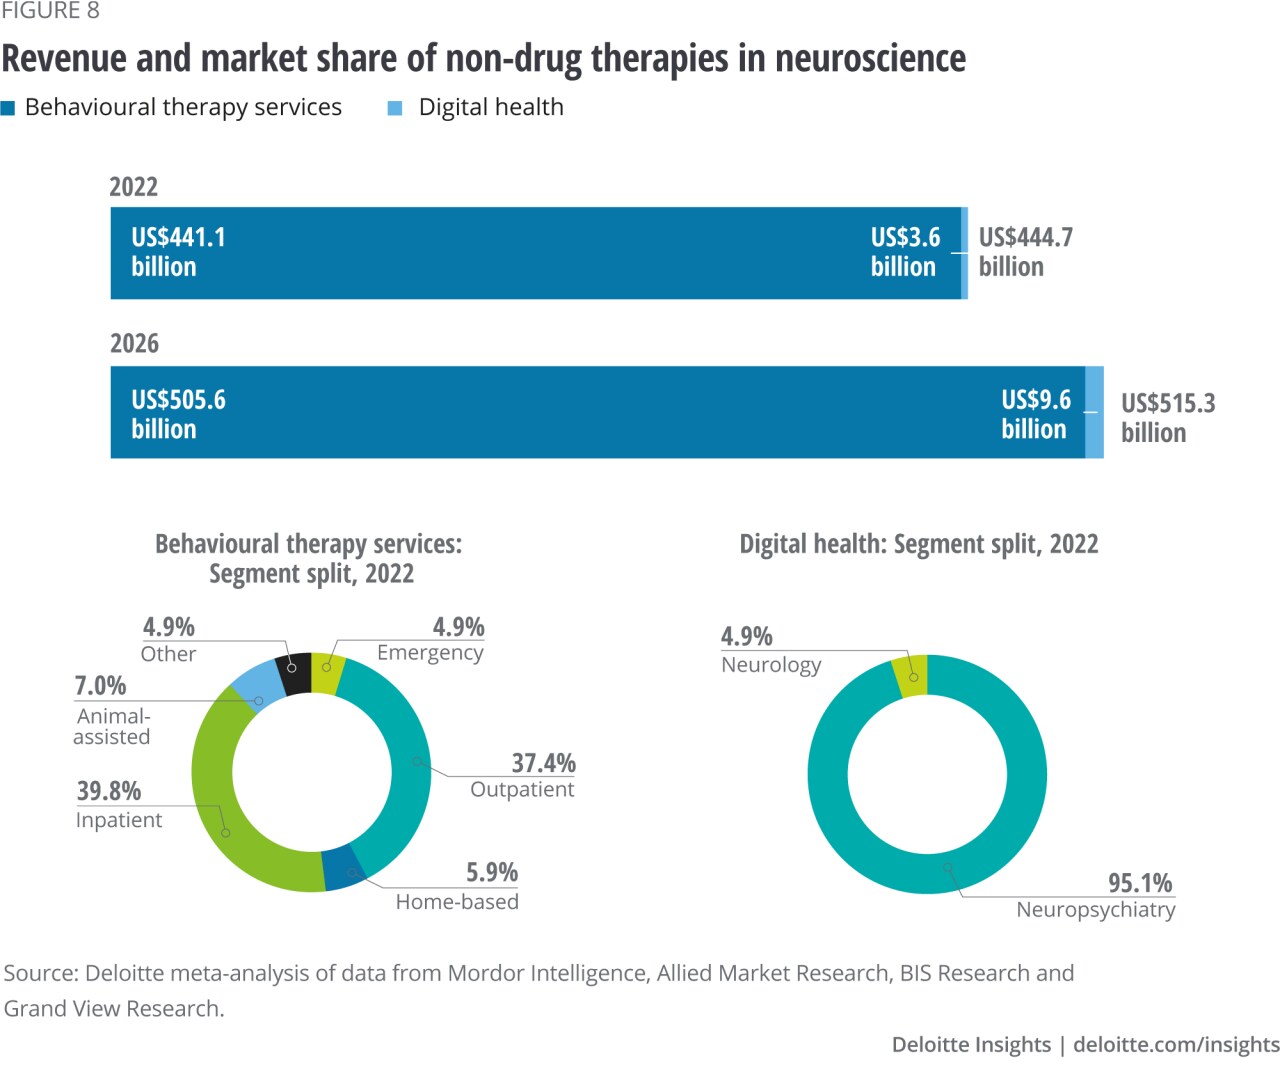 Figure 8. Revenue and market share of nondrug therapies in neuroscience